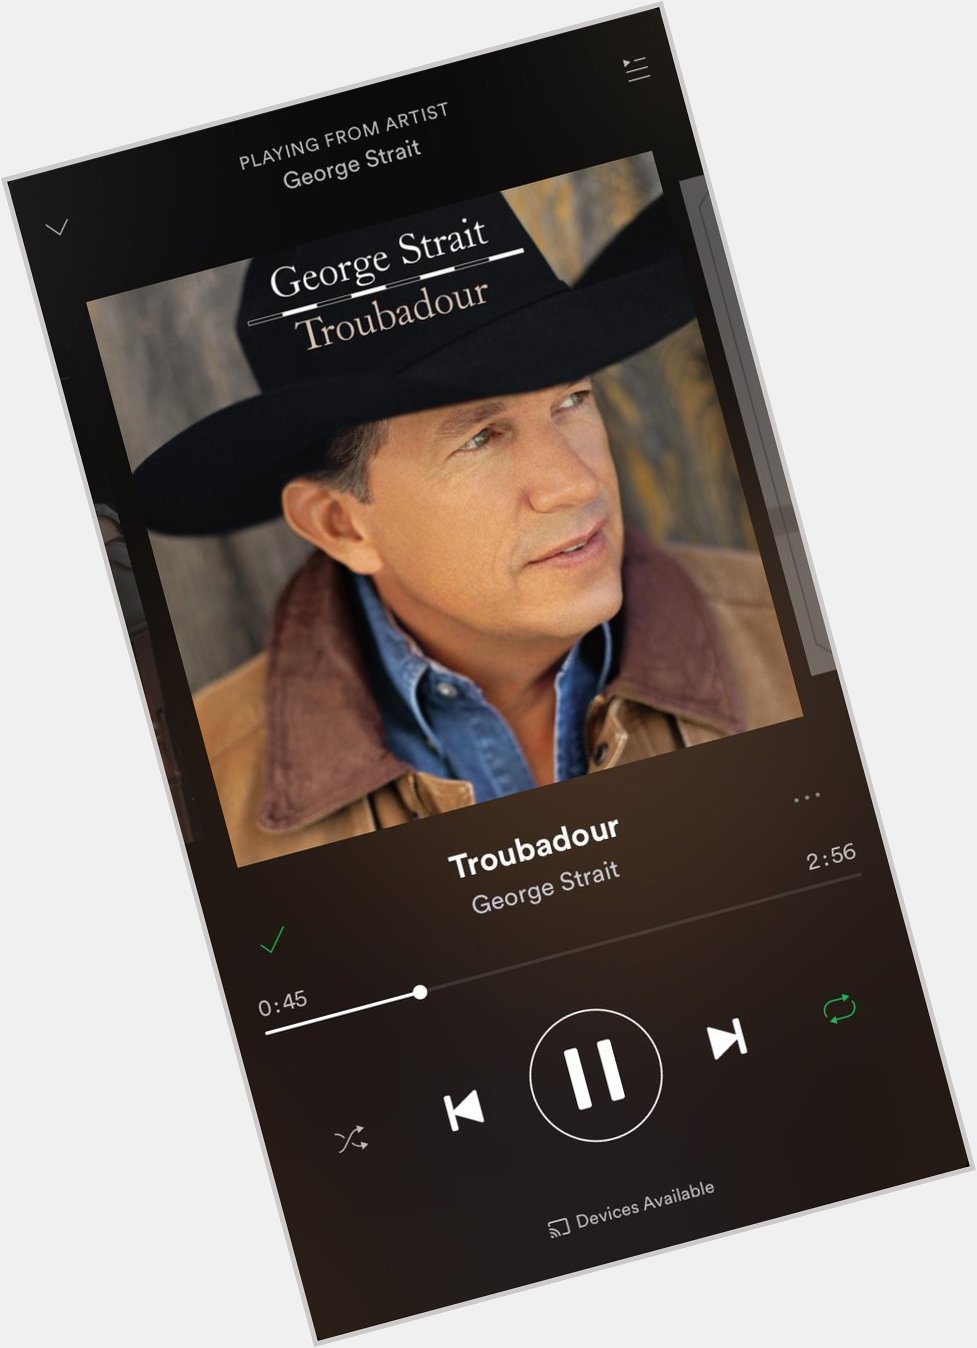 In honor of the king himself happy birthday George strait your a blessing to country folk everywhere  